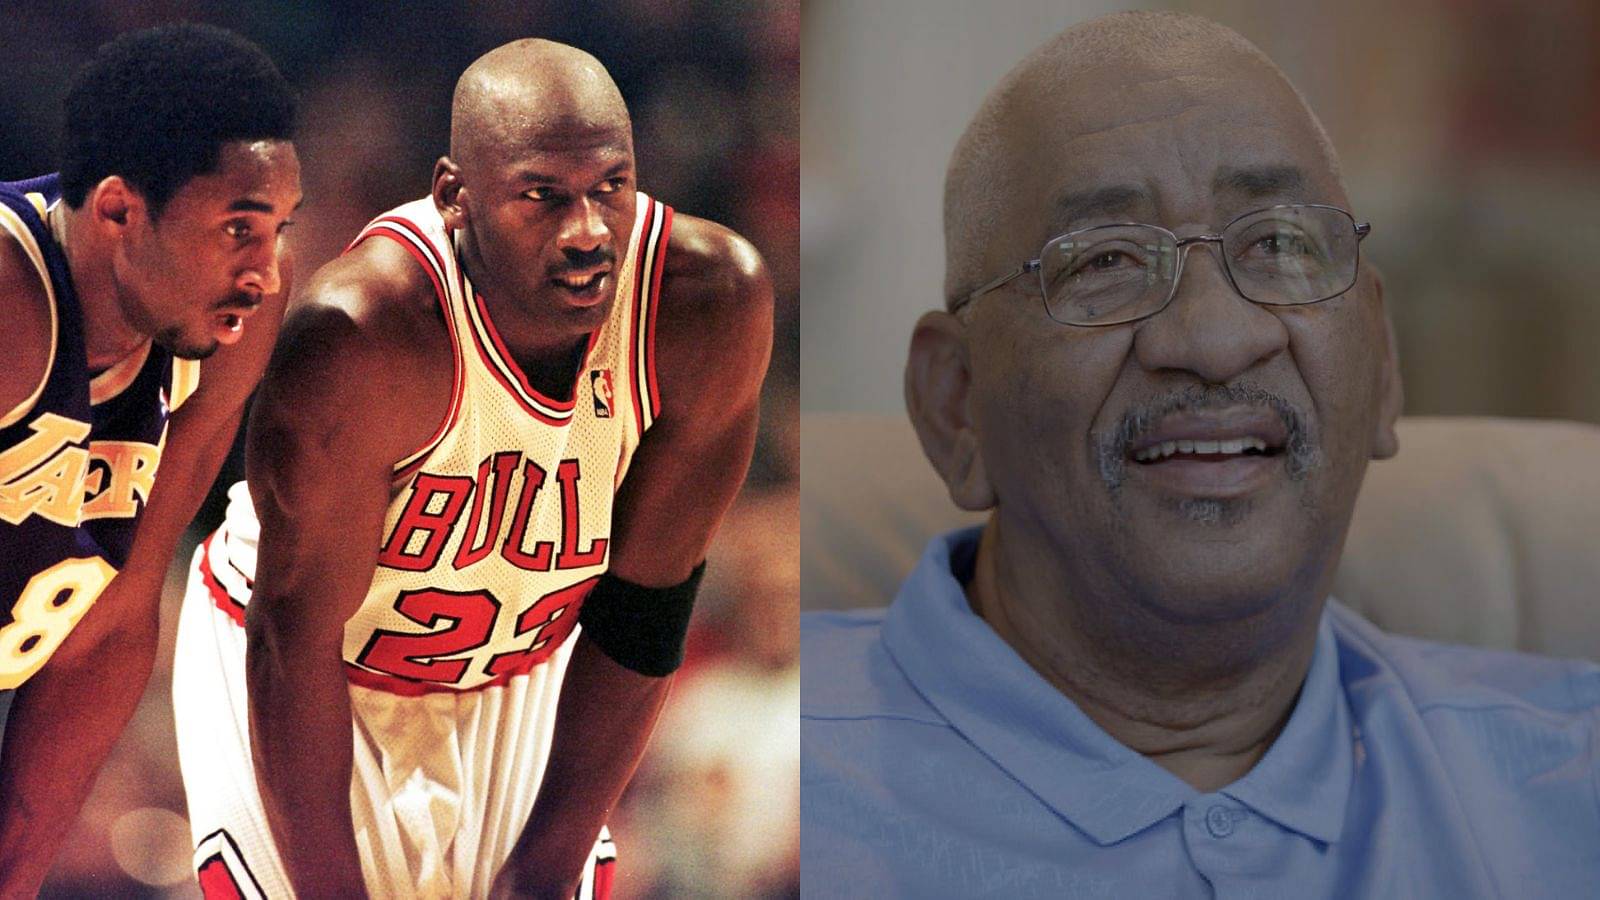 “Michael Jordan couldn’t score like Iceman!”: Spurs legend George Gervin doesn’t consider 10x scoring champ as good as himself